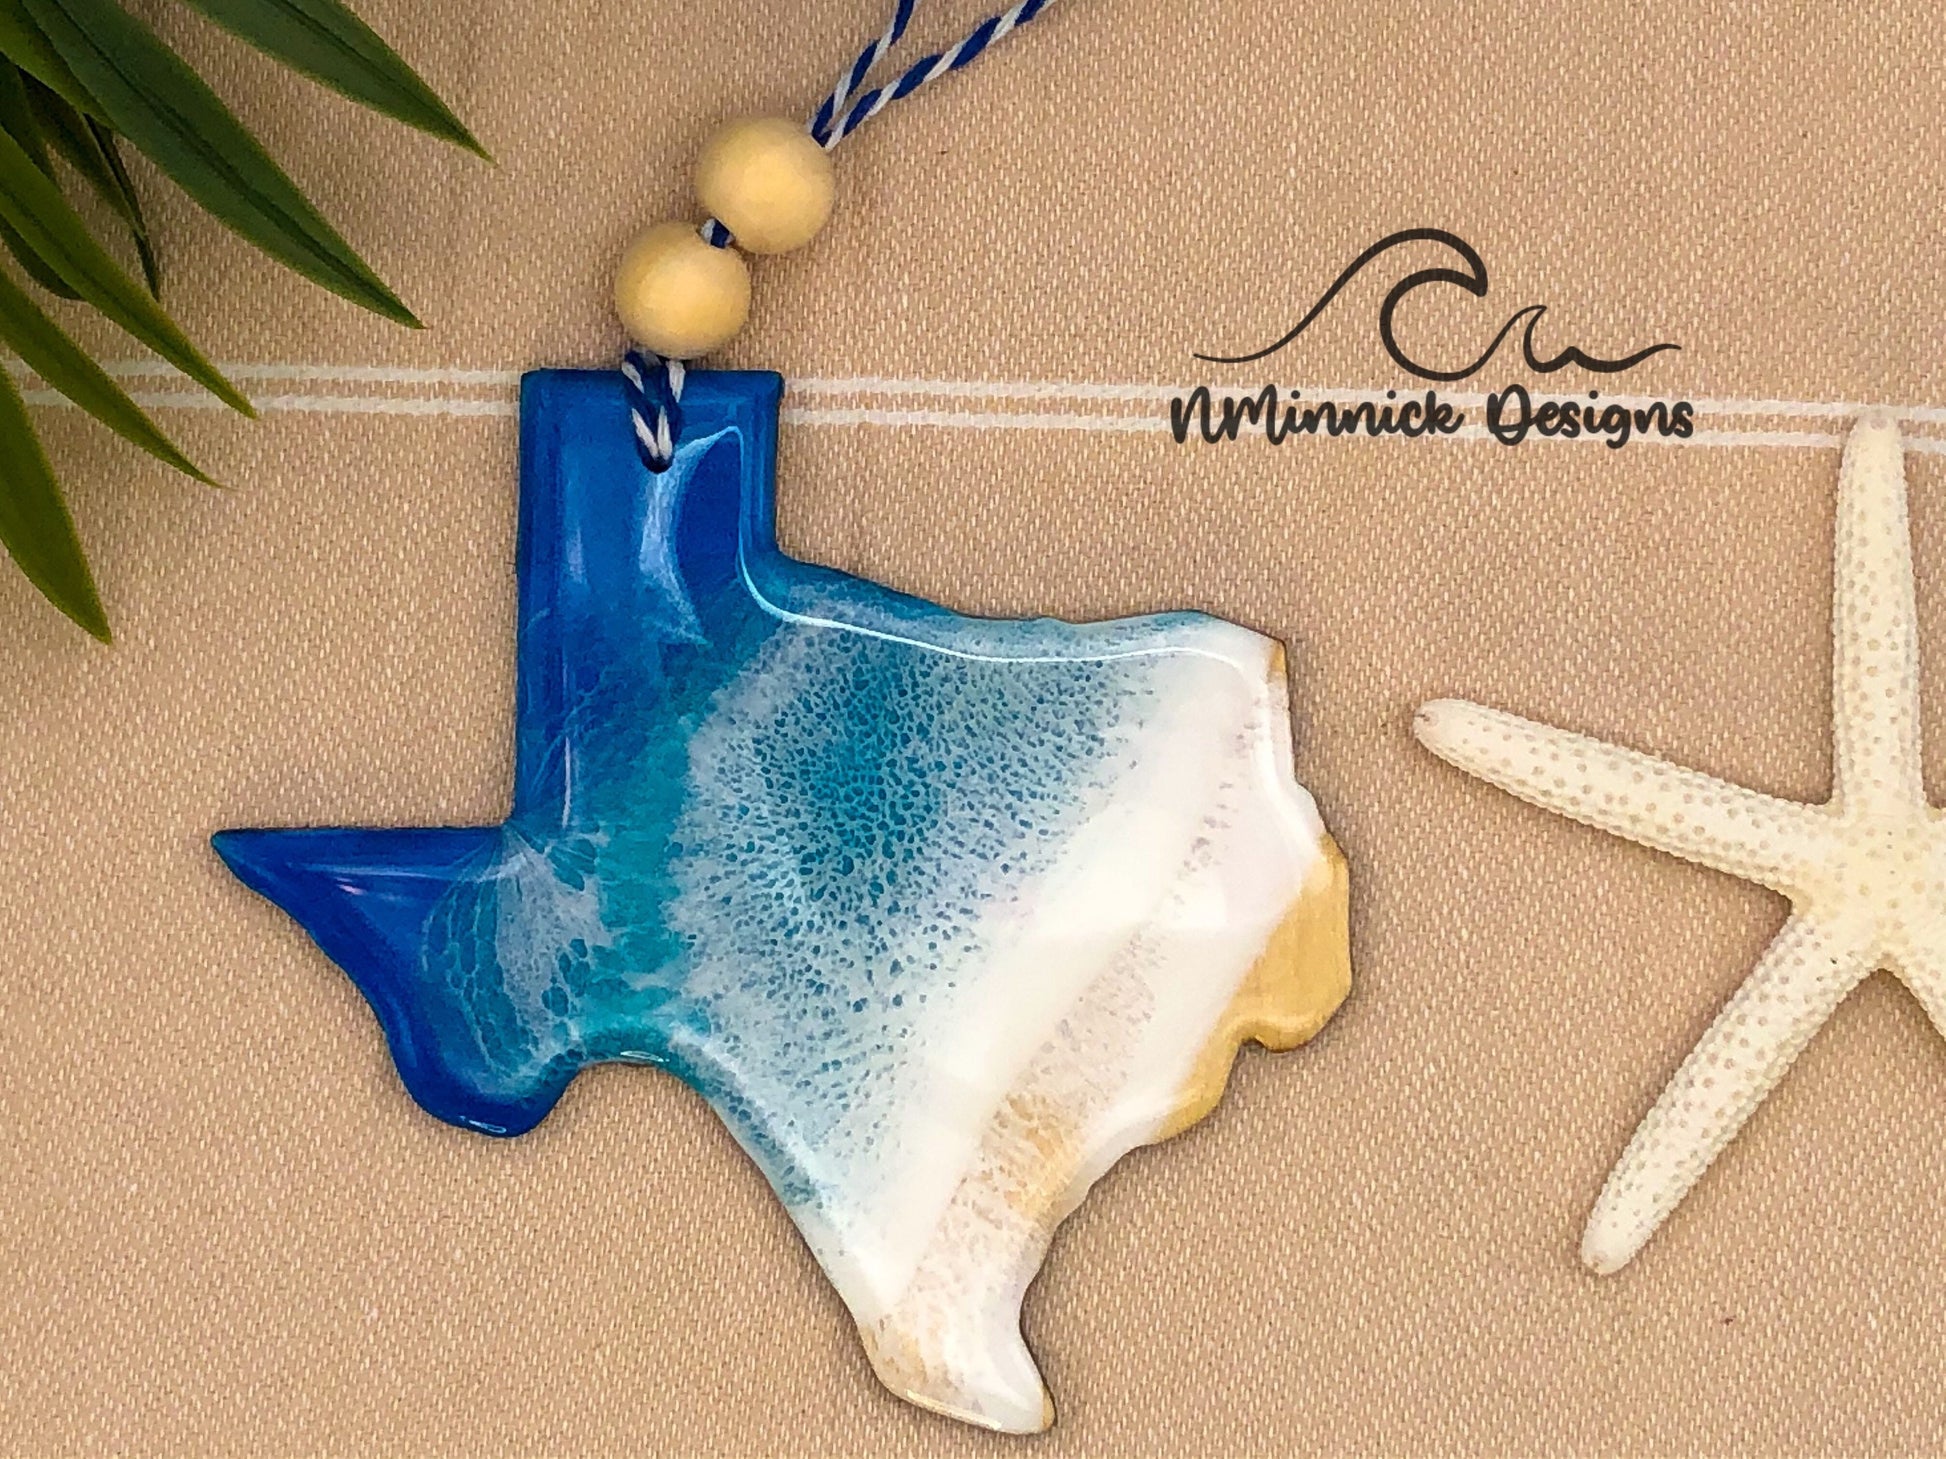 Texas shaped laser cut wood ornament. 1/8 inch thick and approximately 4-4.5 inches wide. Covered in epoxy resin with blue, teal, and white to make it look like waves on a beach.